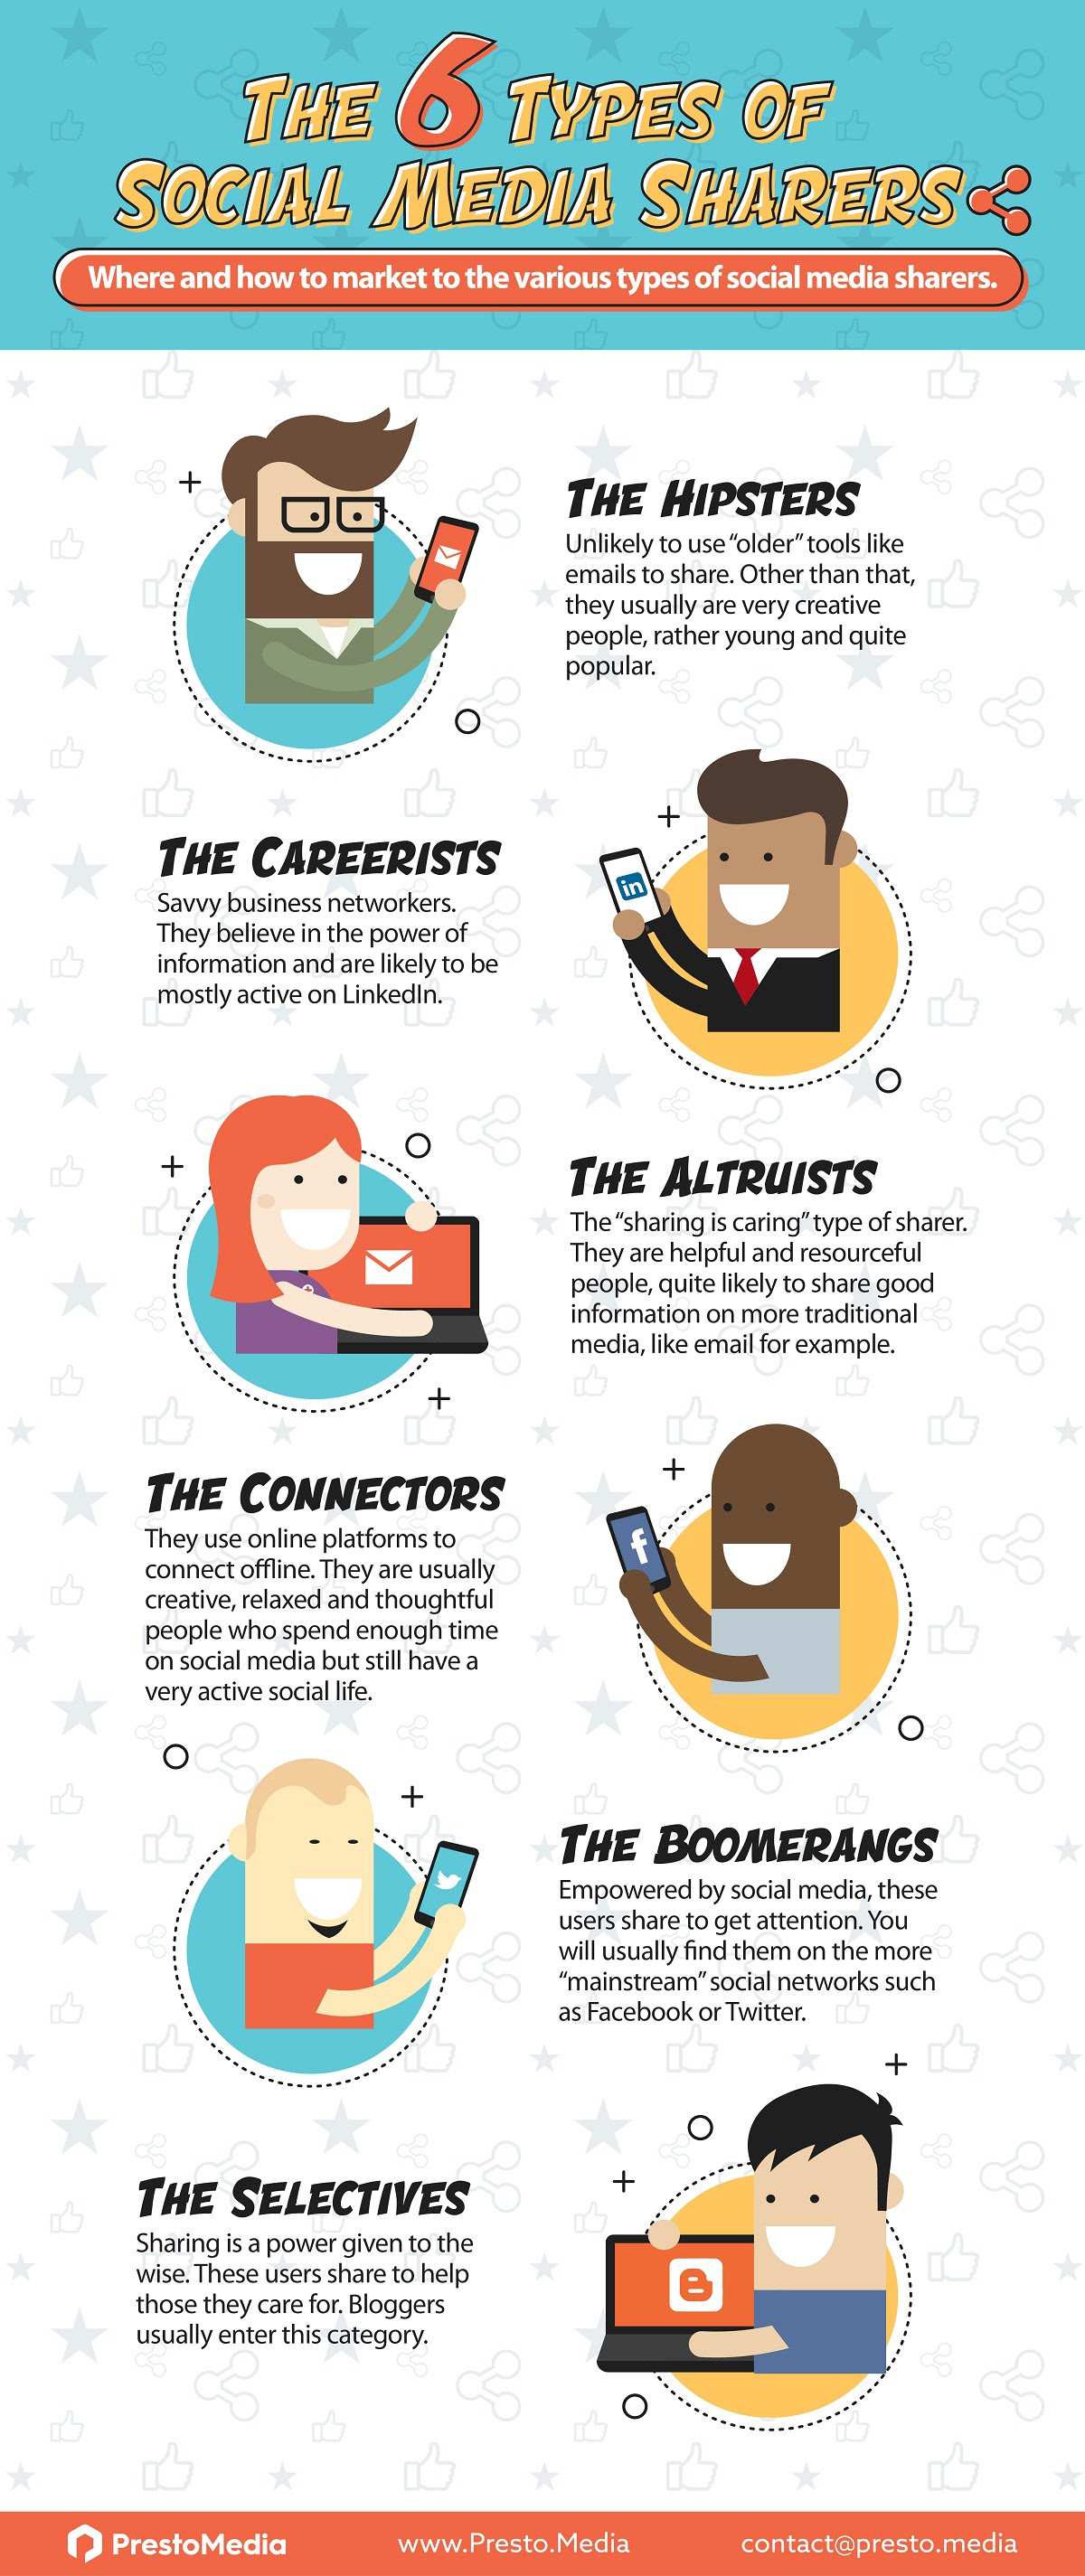 the-6-types-of-social-media-sharers